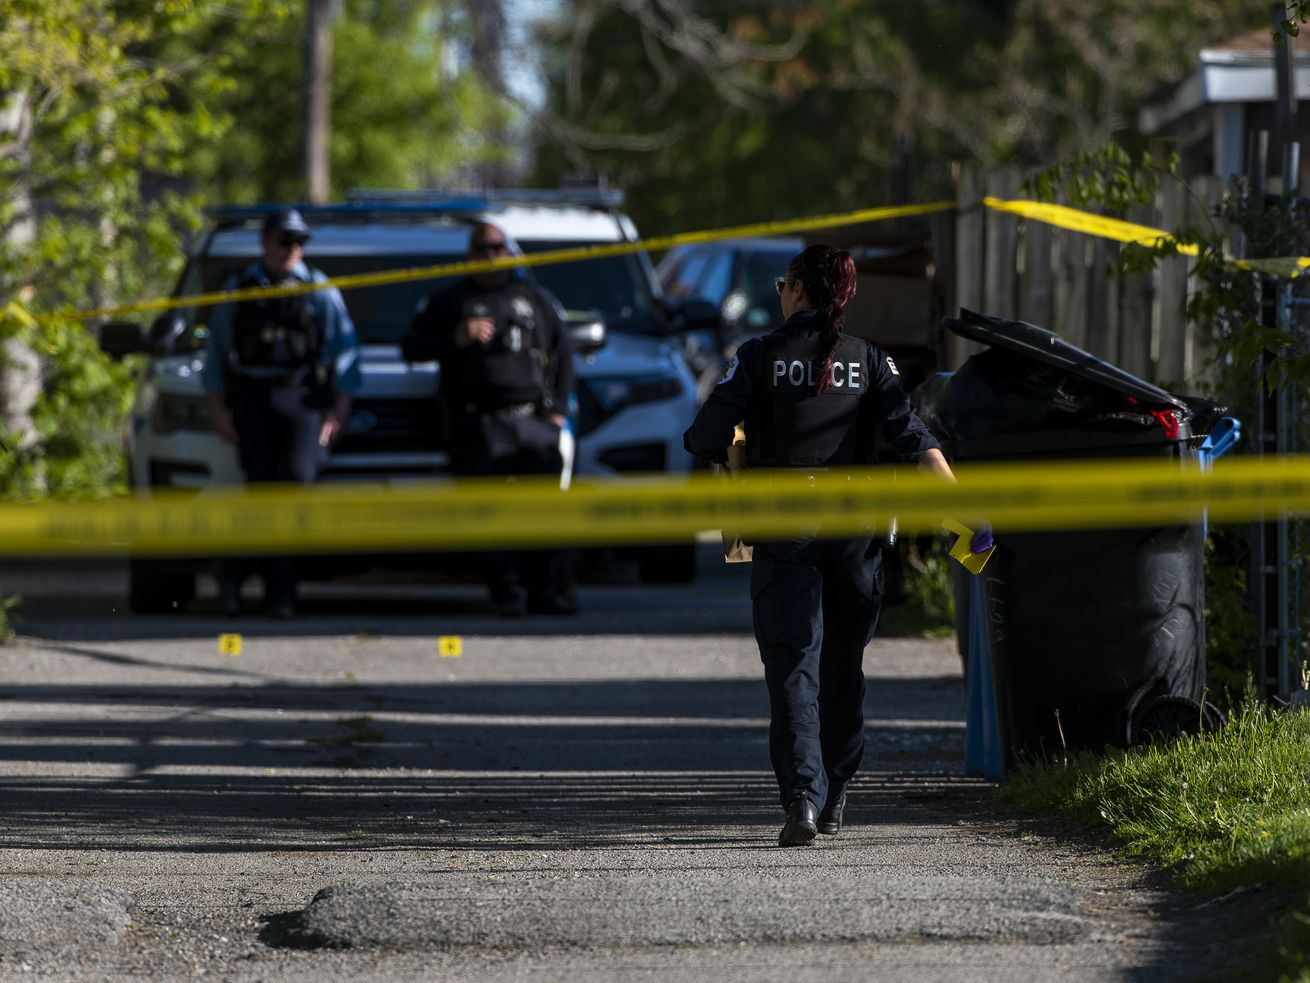 Chicago police work the scene where a 15-year-old boy was critically wounded in a shooting in an alleyway near the 6600 block of South May Avenue in the Englewood neighborhood on May 12.